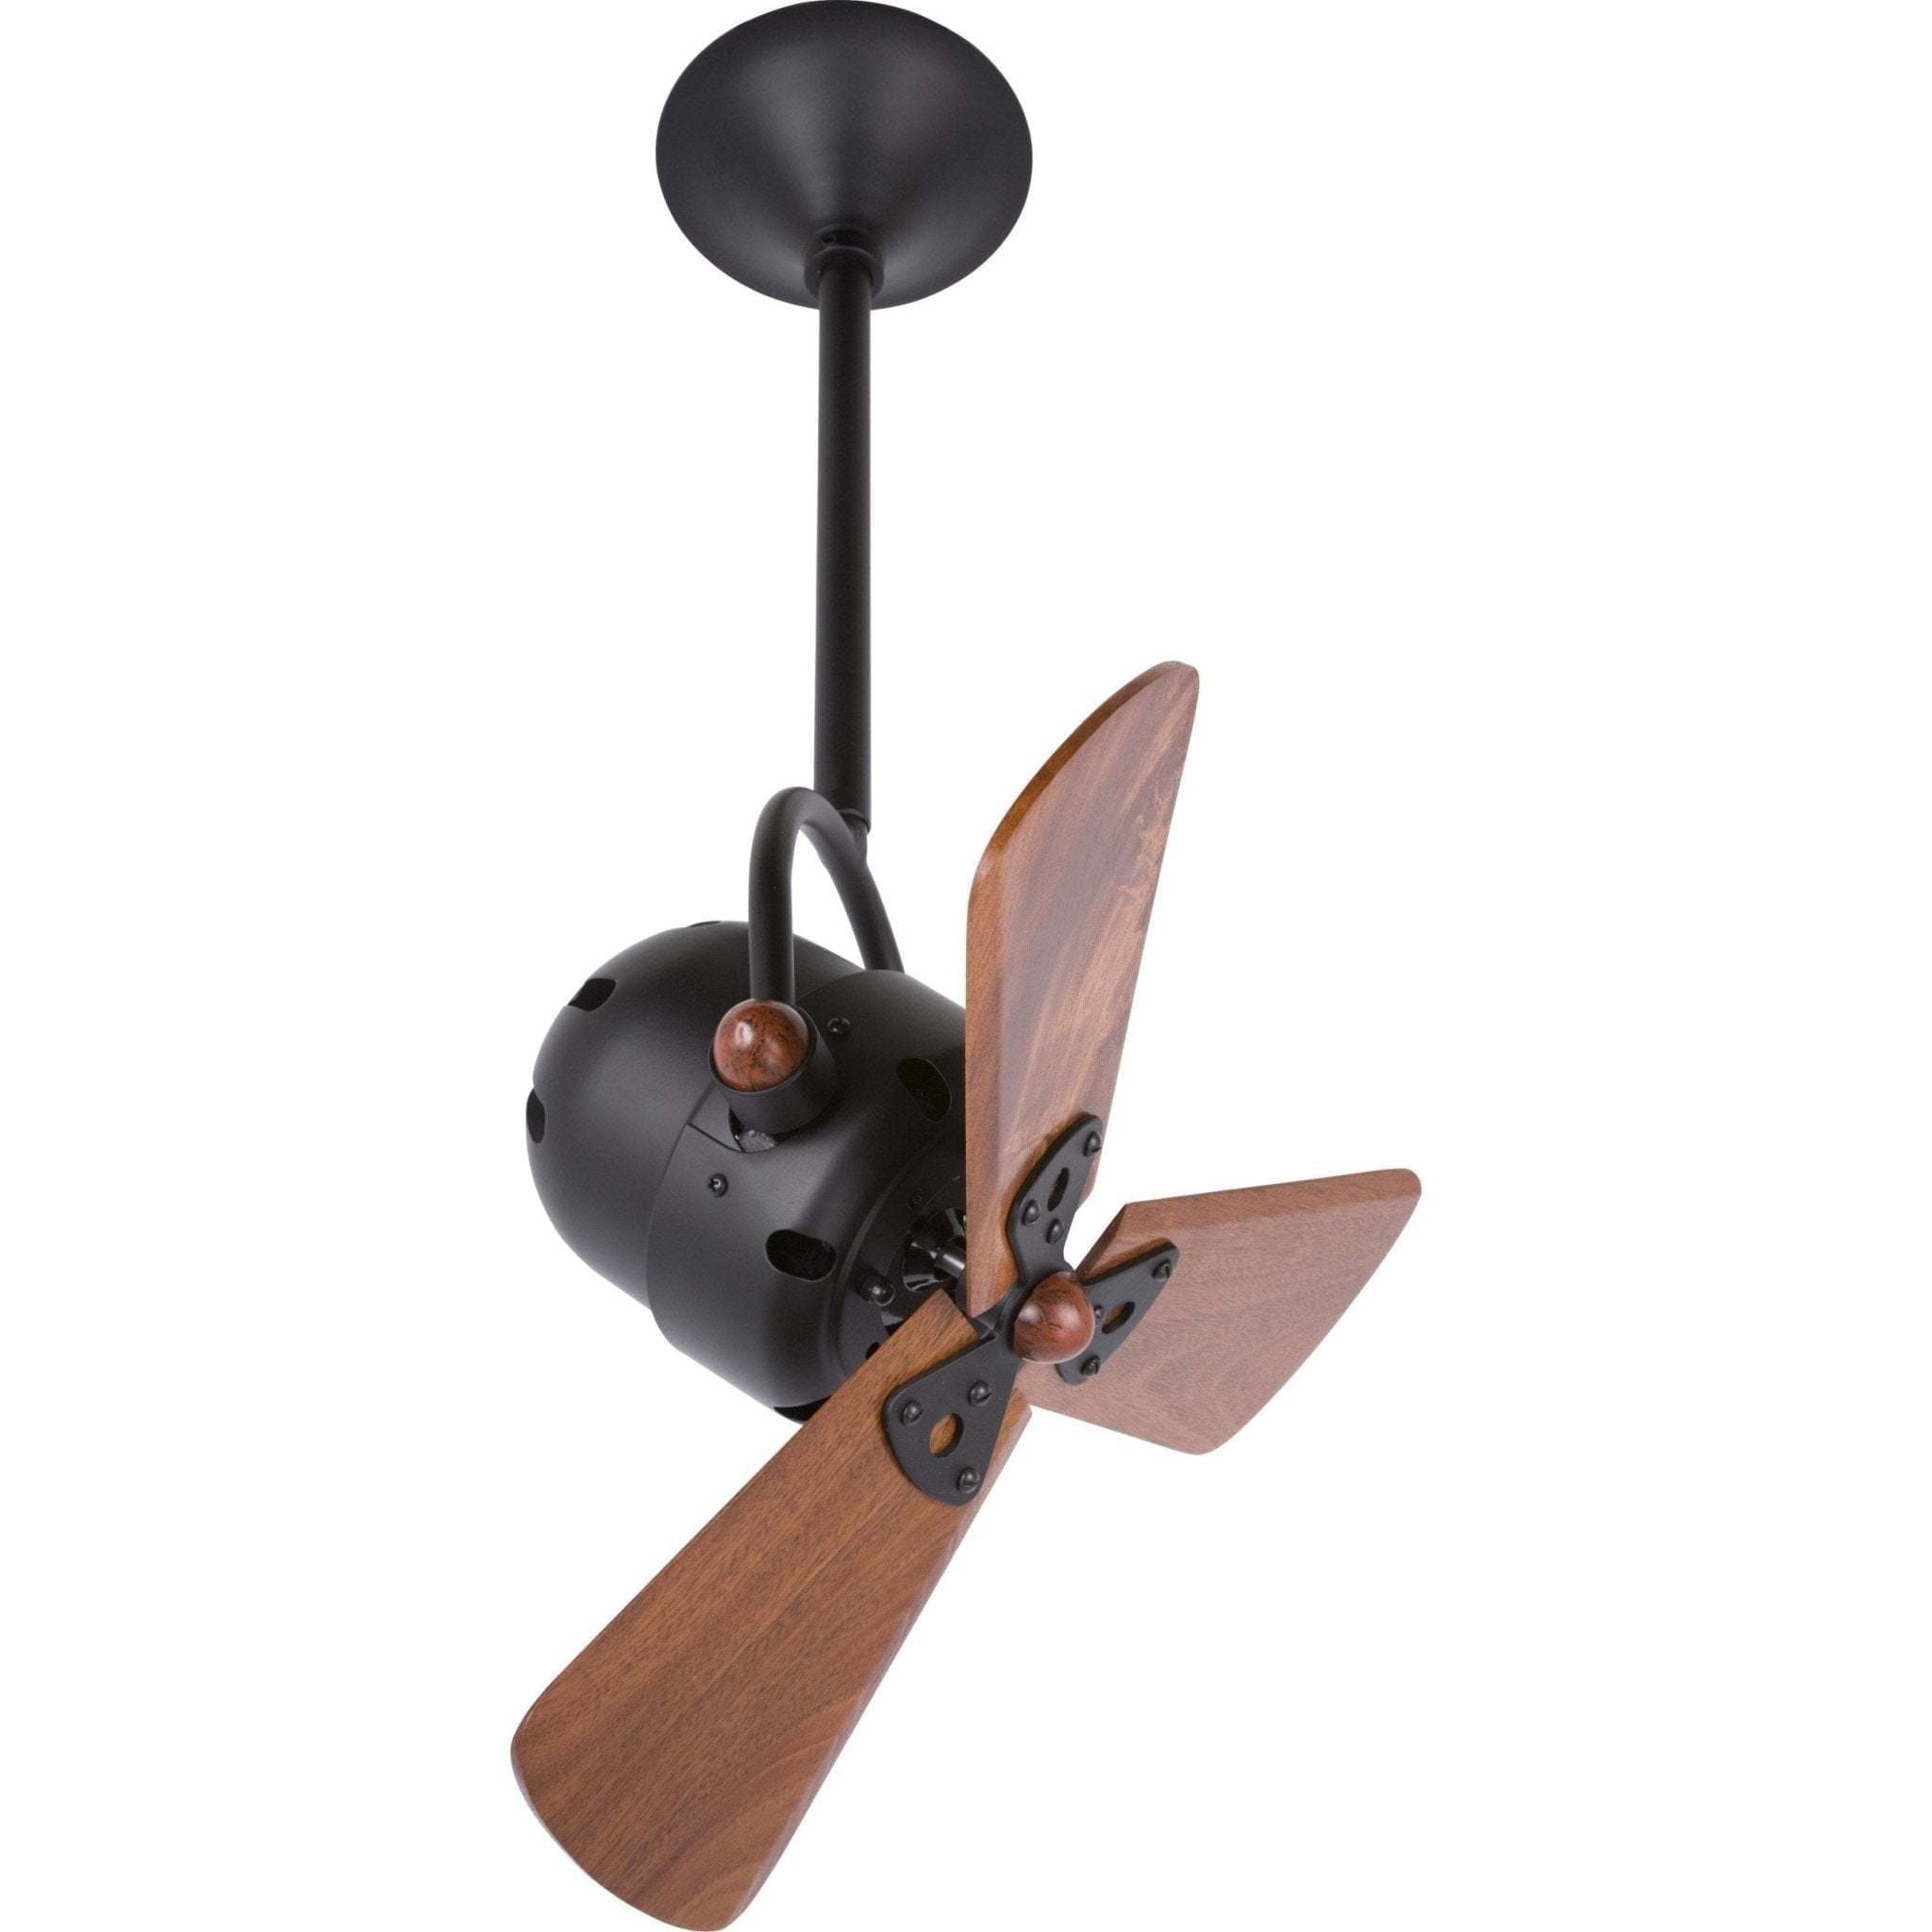 Bianca Directional Ceiling Fan - Wood Blades - Image 1